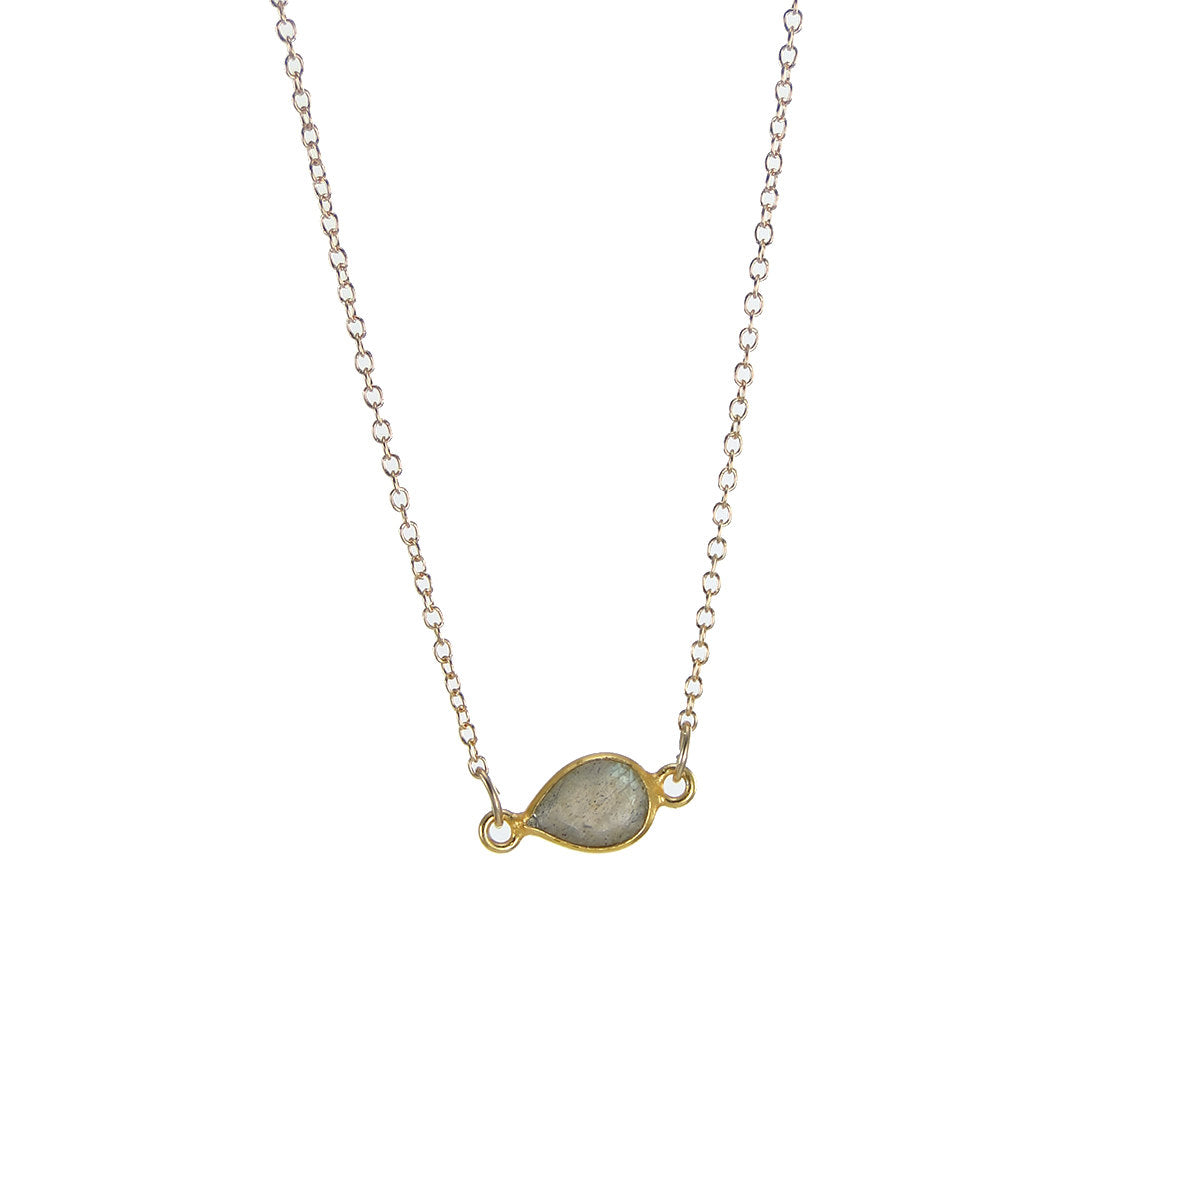 Gold Layered Necklace with Gemstone and Charm Pendant, Dainty Gold  Necklace, Layered Gold Necklace,Cute Necklaces for Women,Pendant Necklace